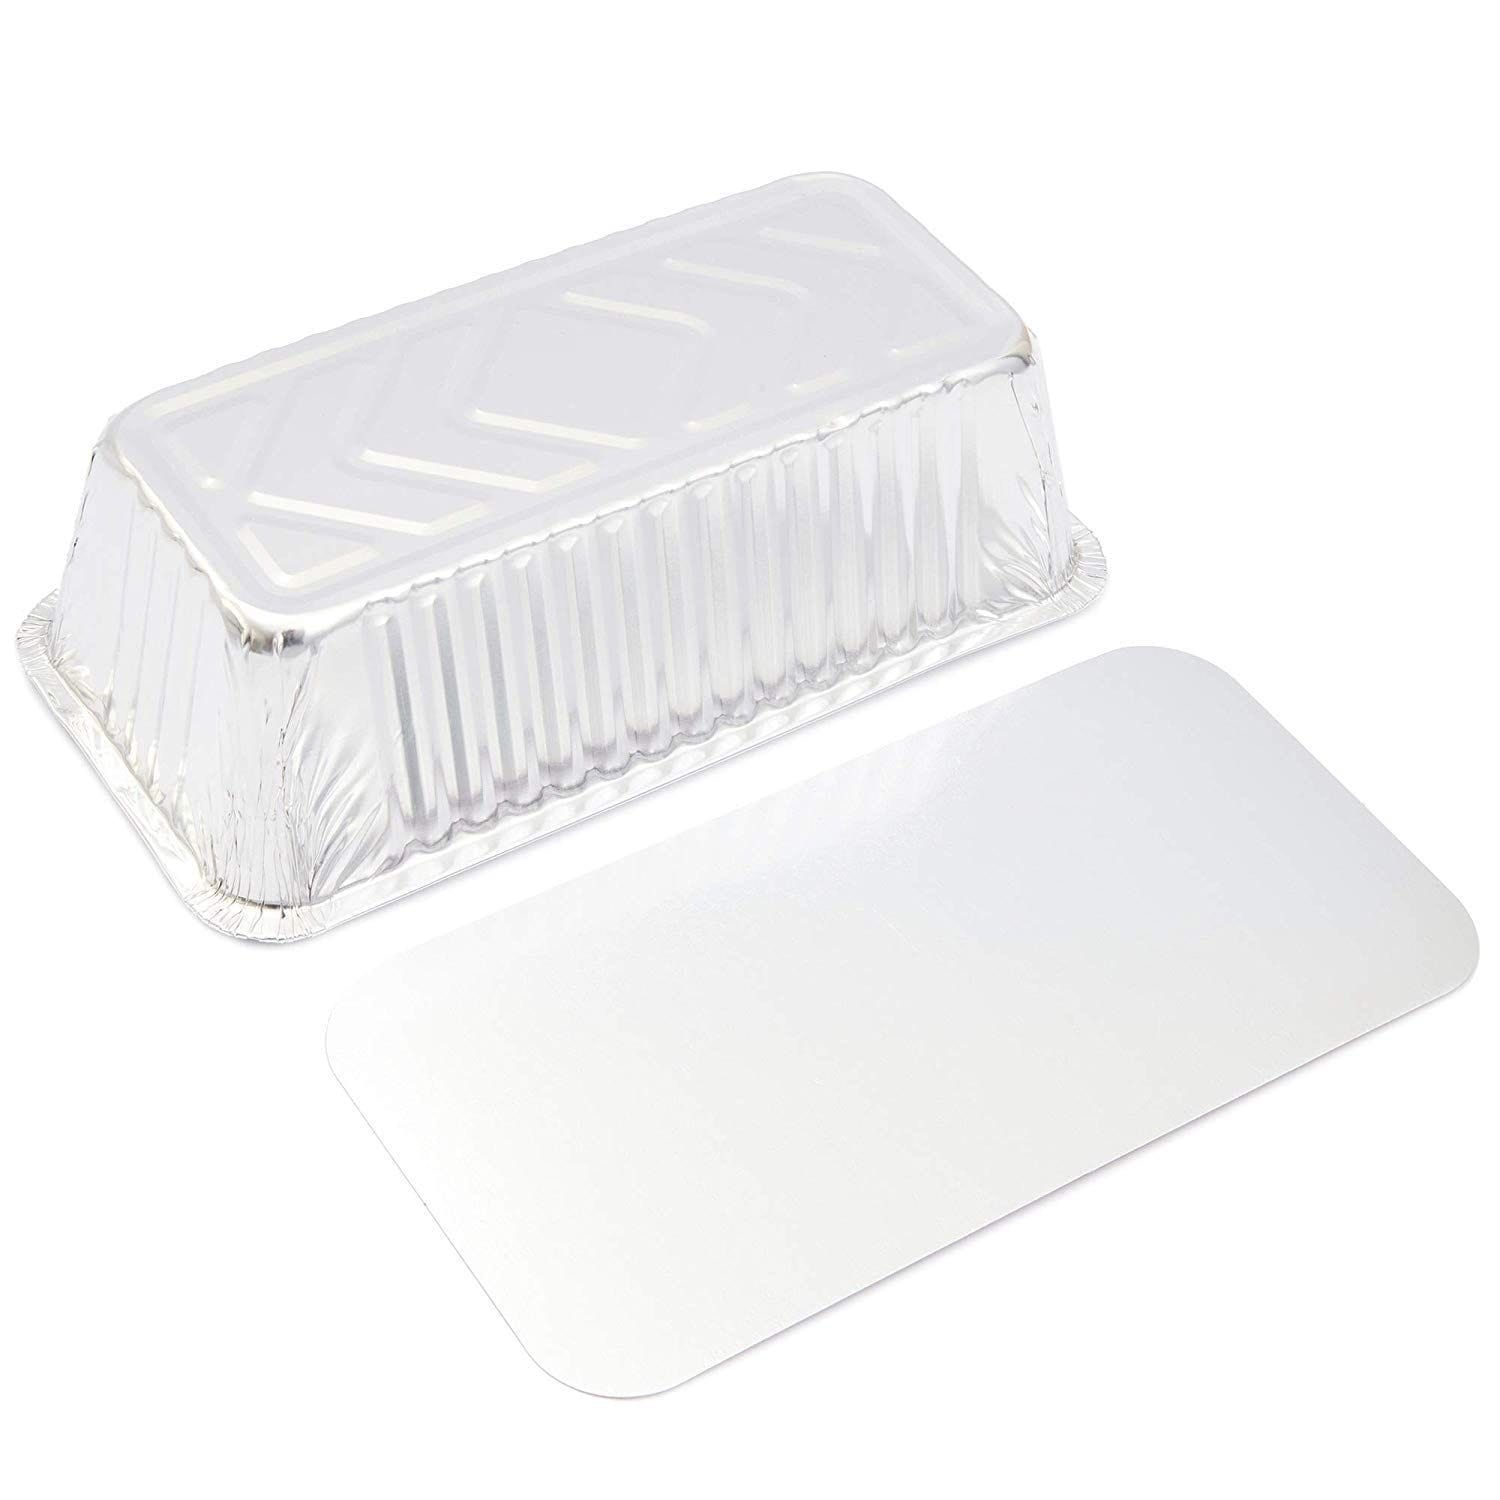 Set of 20 Disposable Foil Oven Liners - 18.5 X 15.5 Inch Aluminum